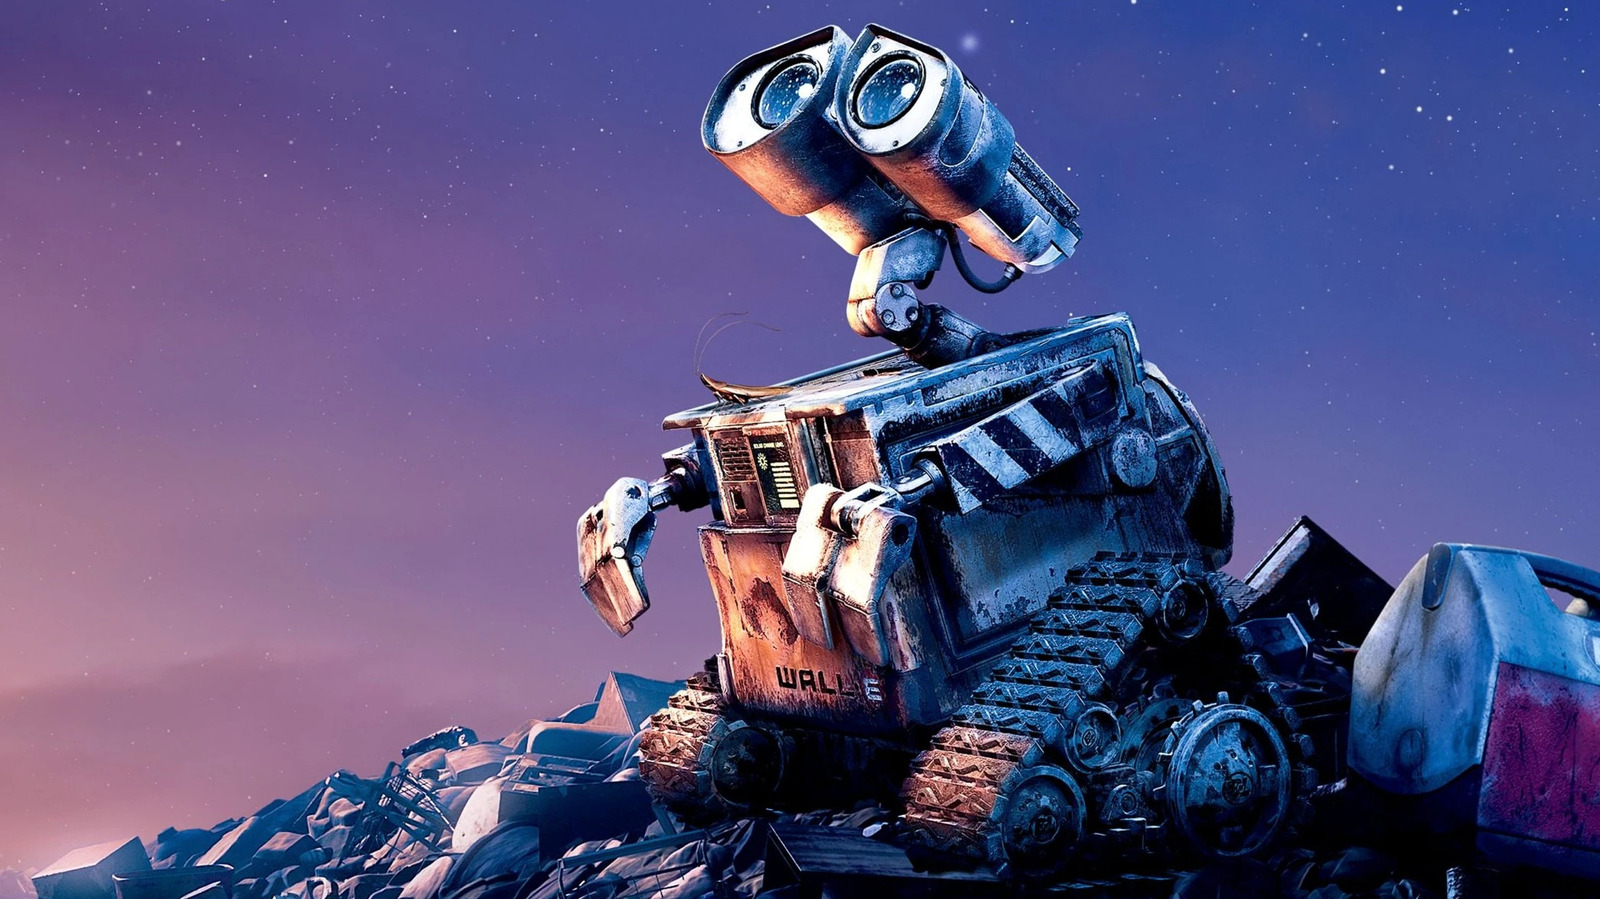 How the ‘Racy’ Scene From Animal House Influenced Pixar’s WALL-E [Exclusive]